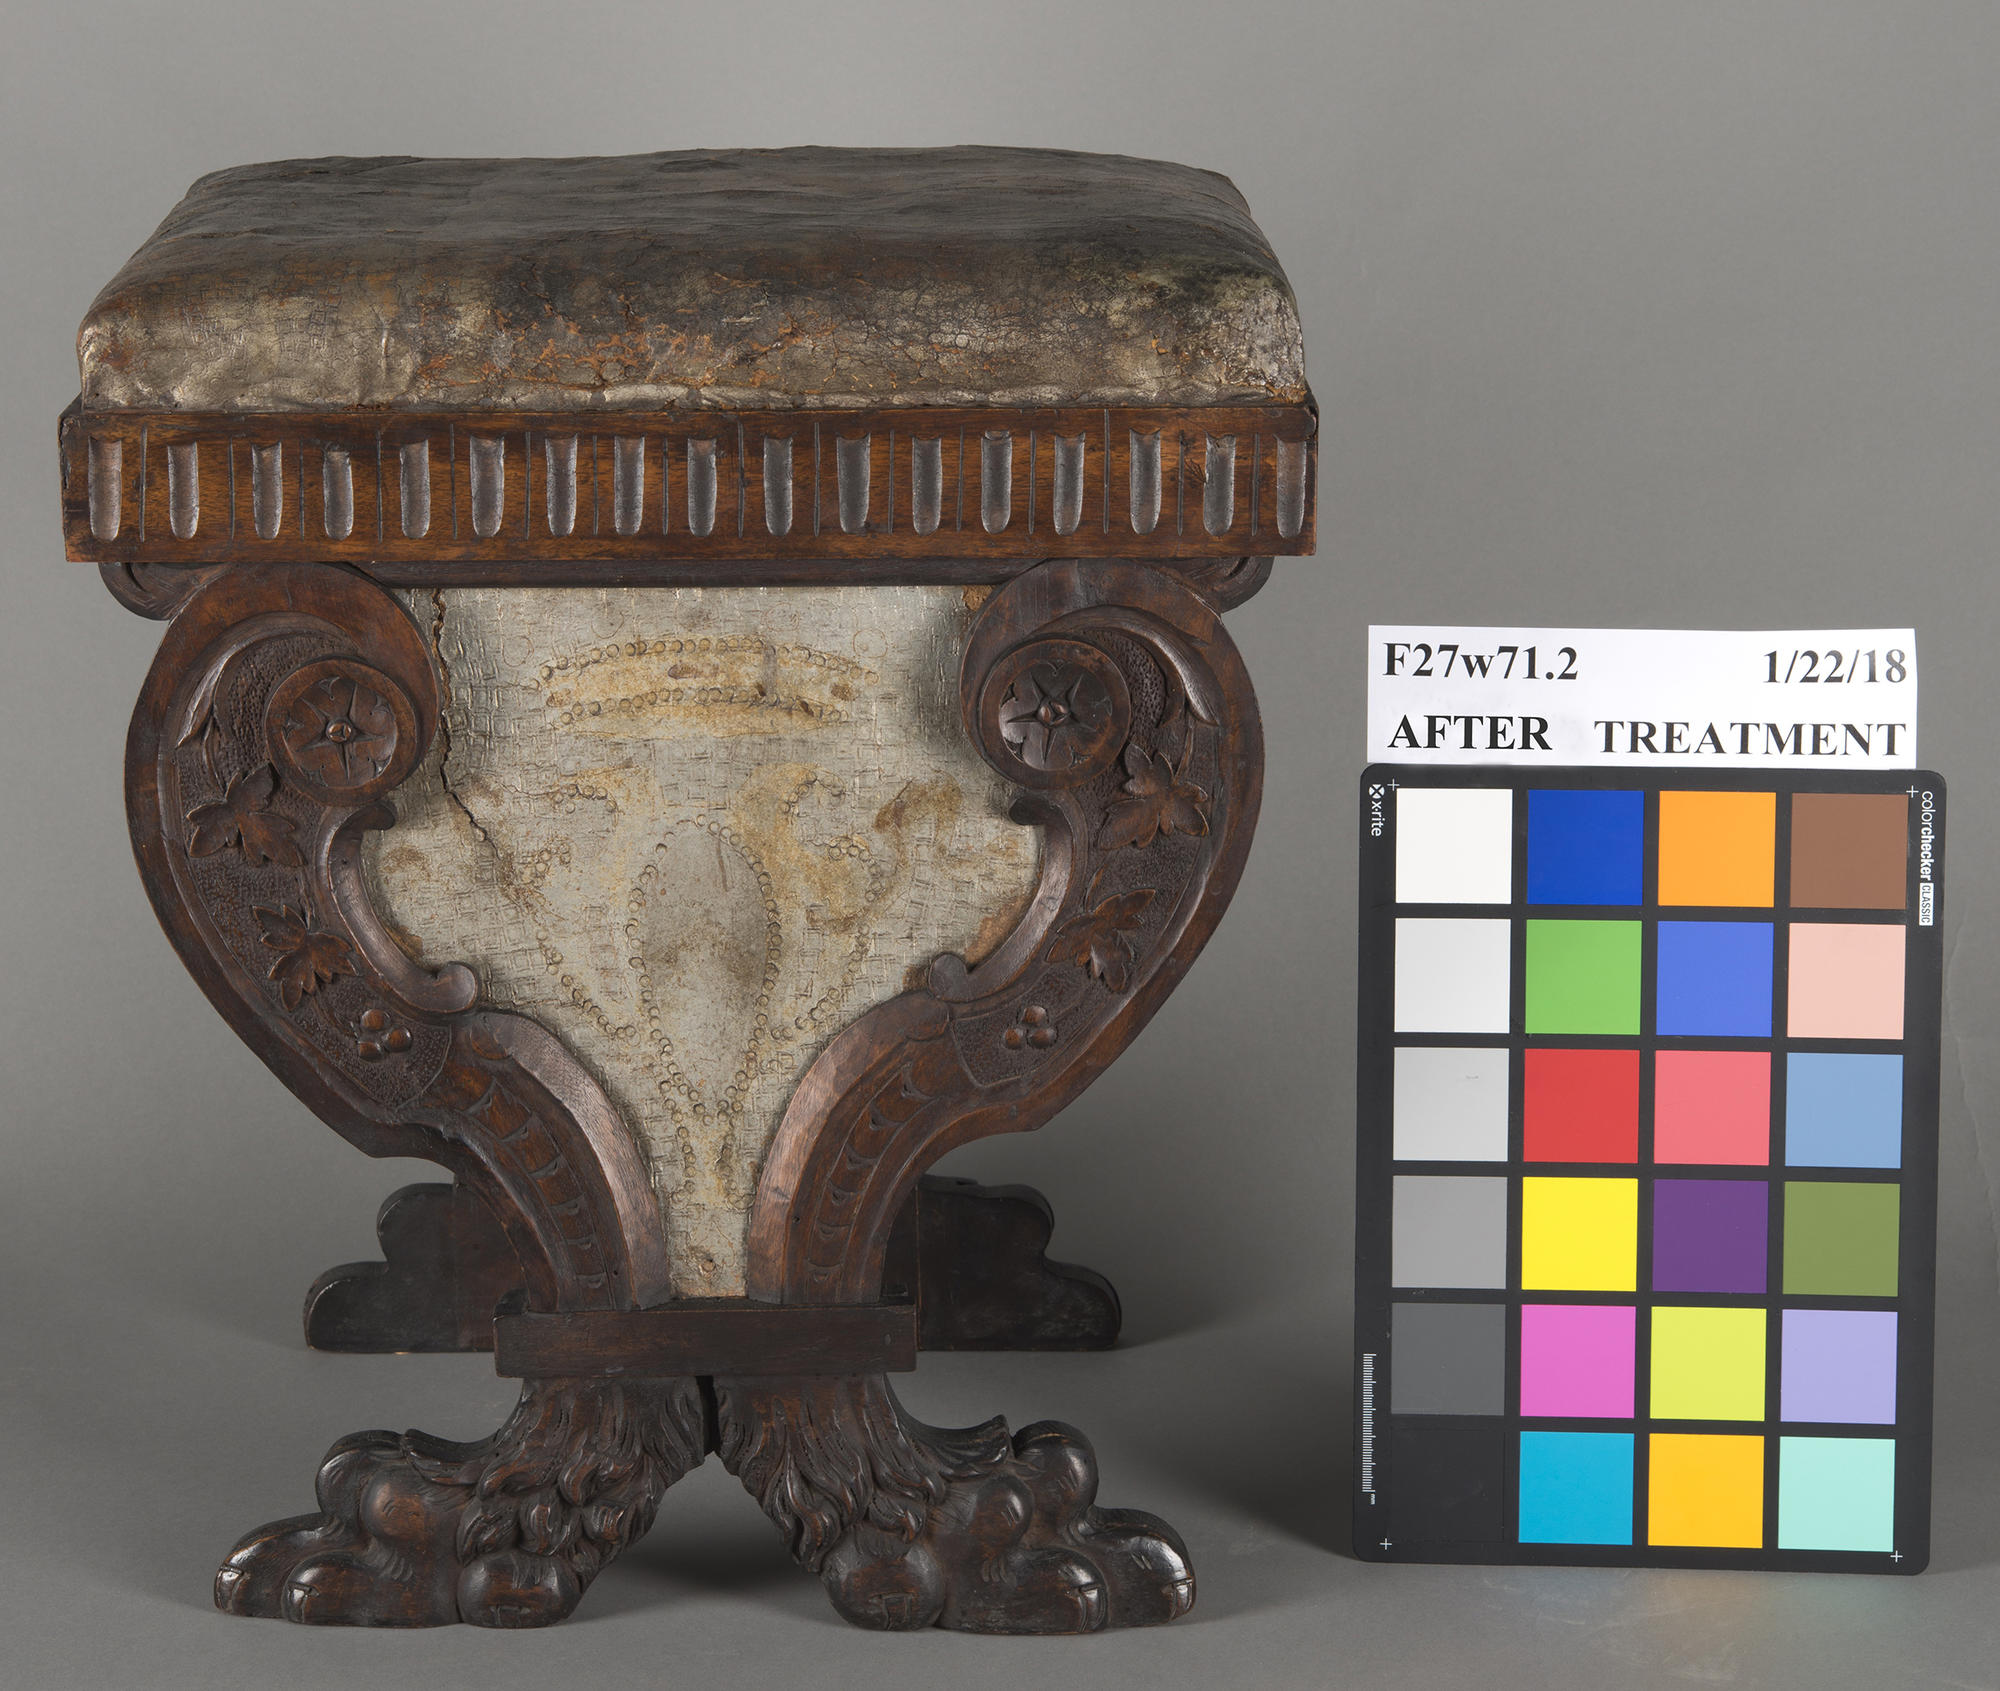 One of the stools, F27w71.2, after conservation